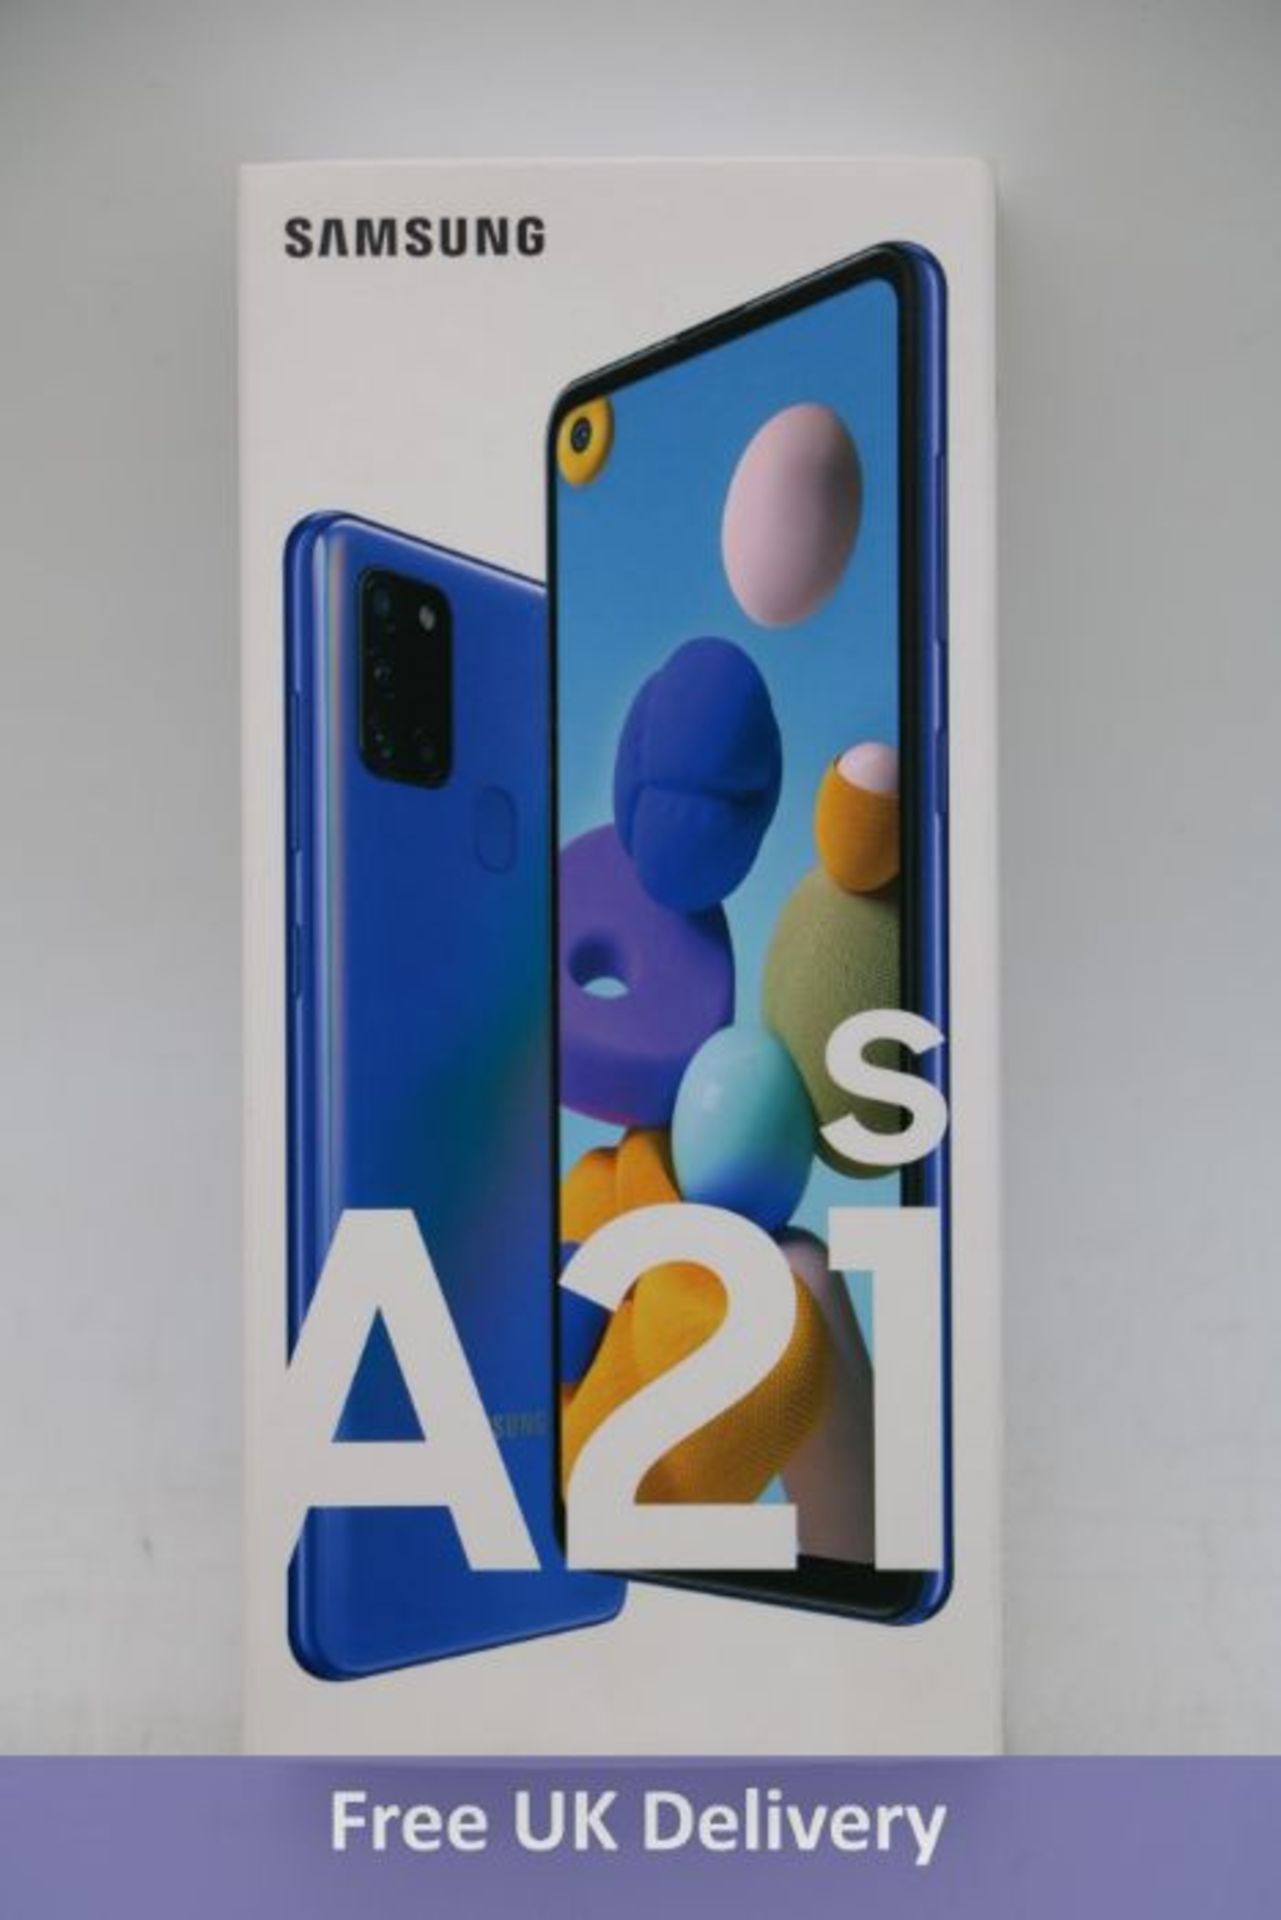 Samsung Galaxy A21s Android Mobile Phone, 64GB, Blue. Brand New, Sealed